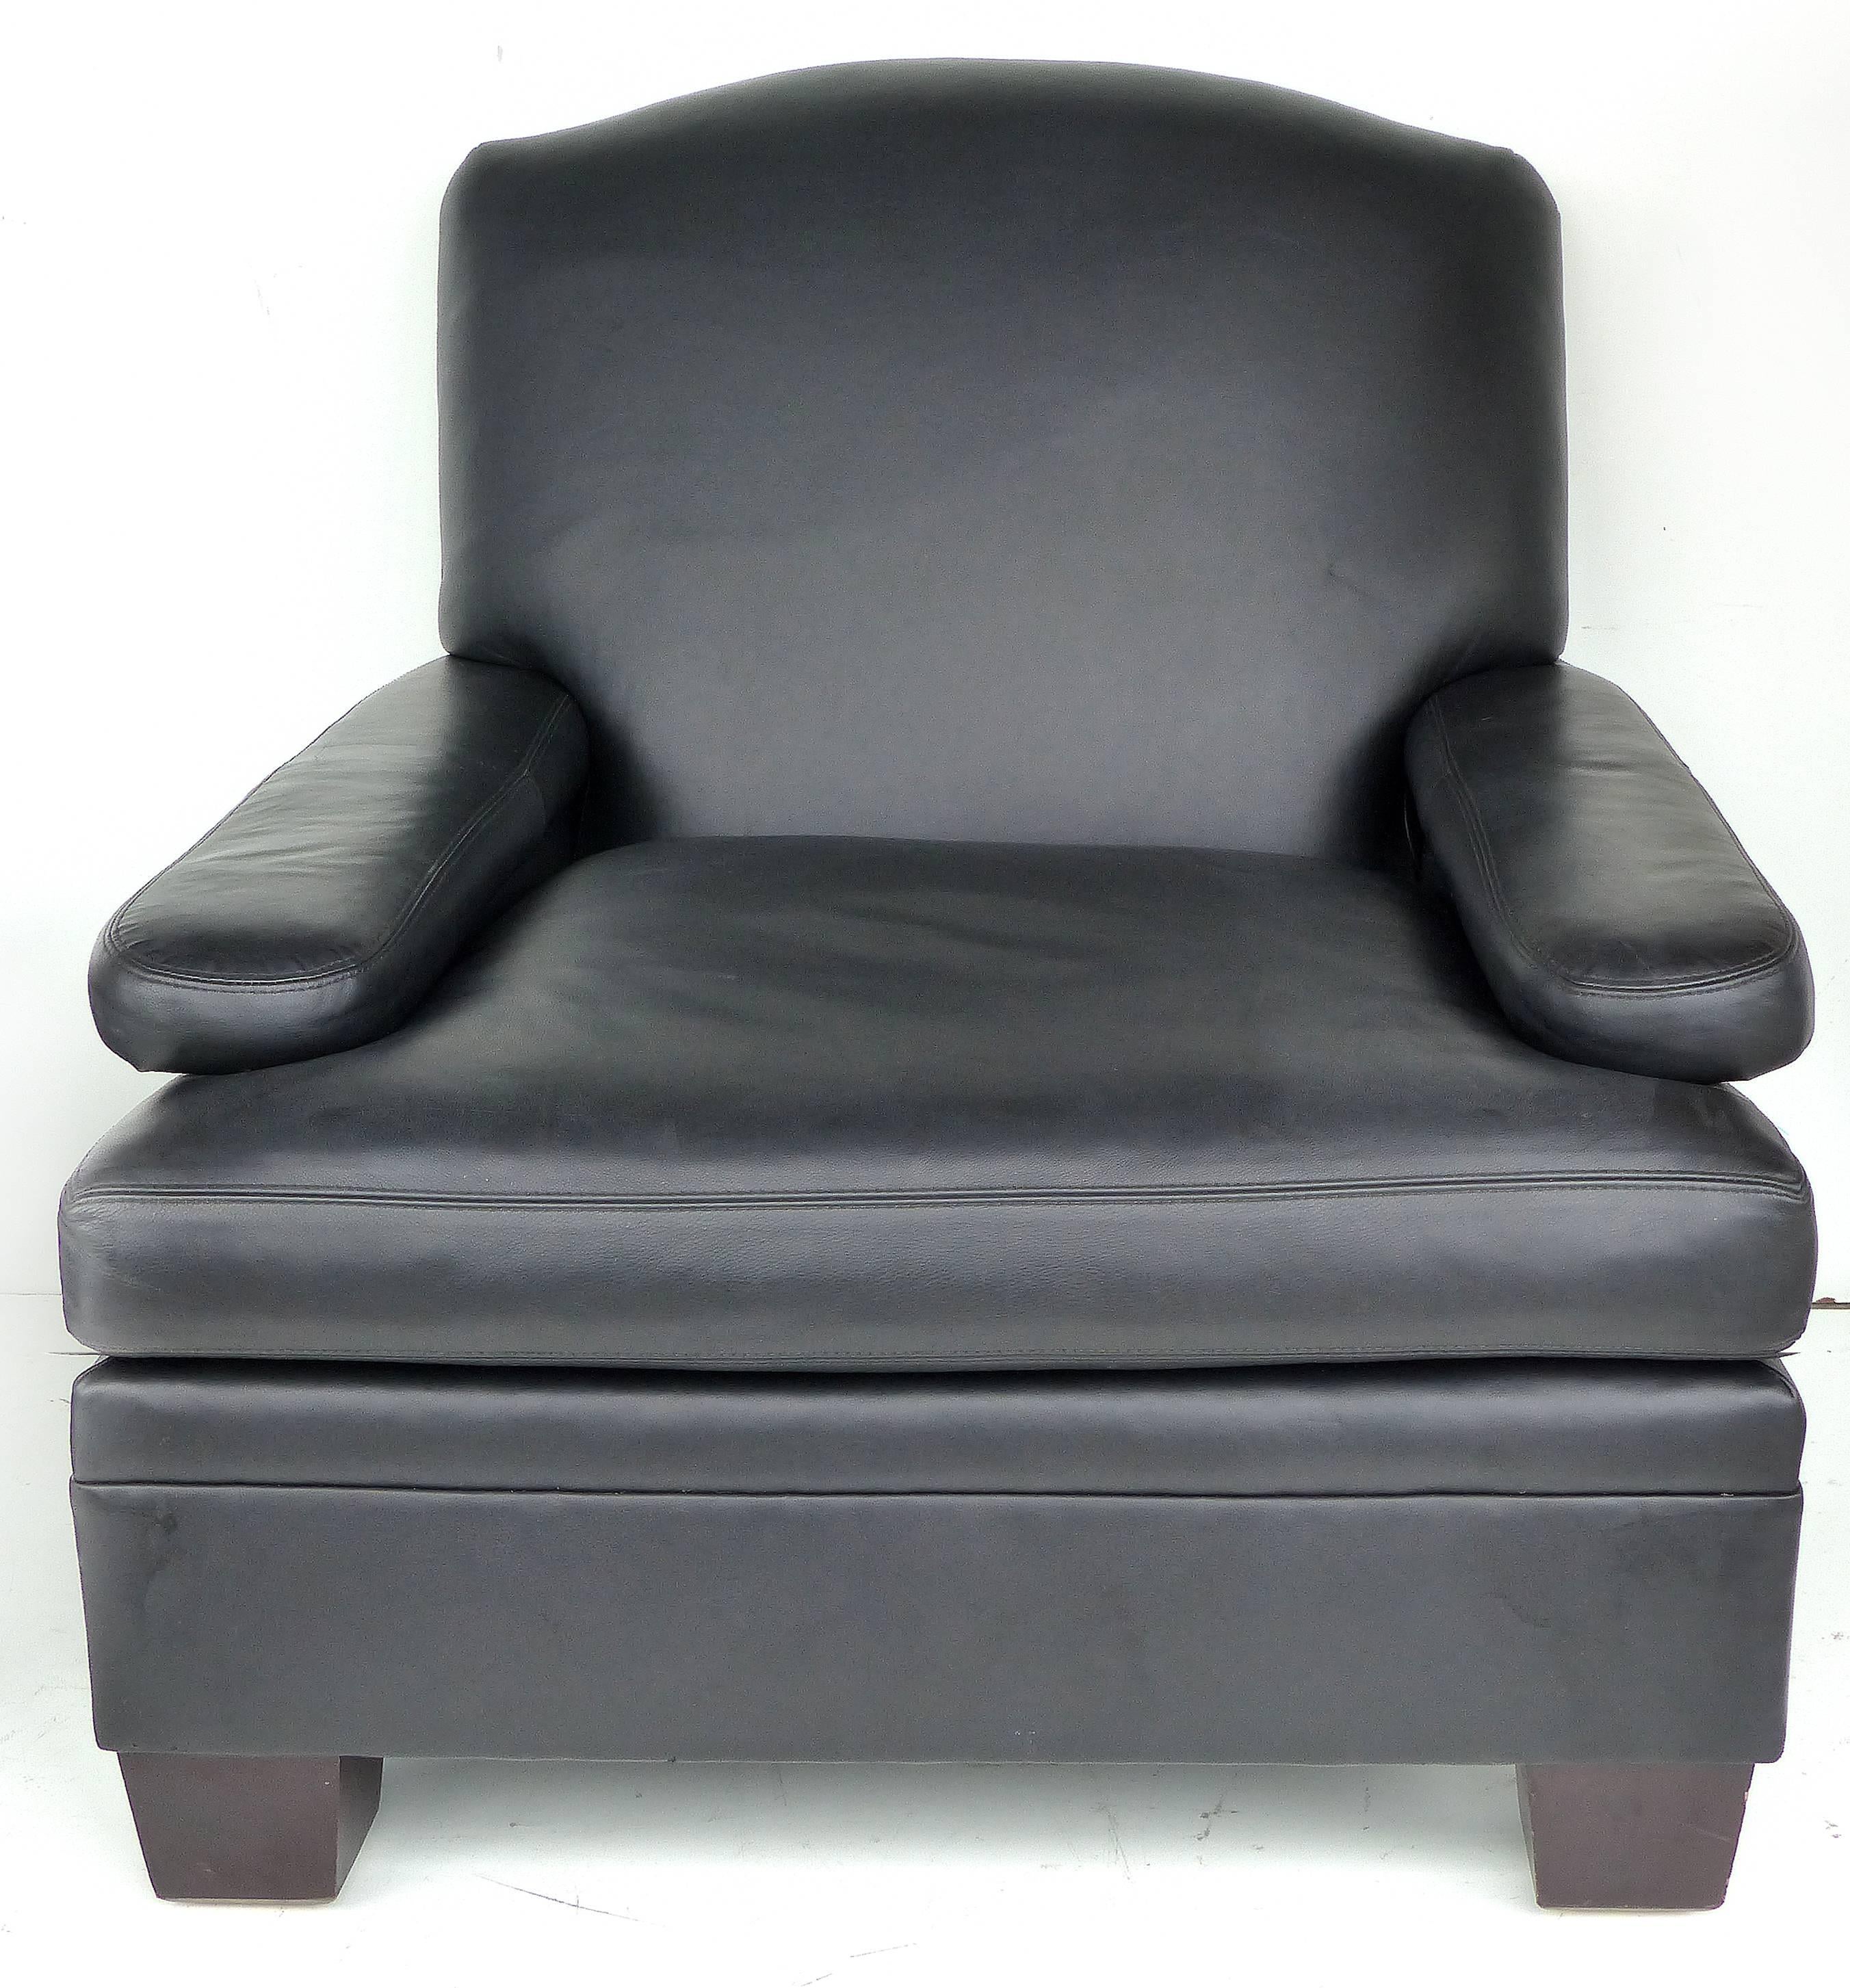 Ralph Lauren London Leather Club Chair with Matching Ottoman

Offered for sale is a Ralph Lauren London club chair with matching ottoman. A Classic made by Henredon Furniture Upholstery Division in North Carolina exclusively for Ralph Lauren. The